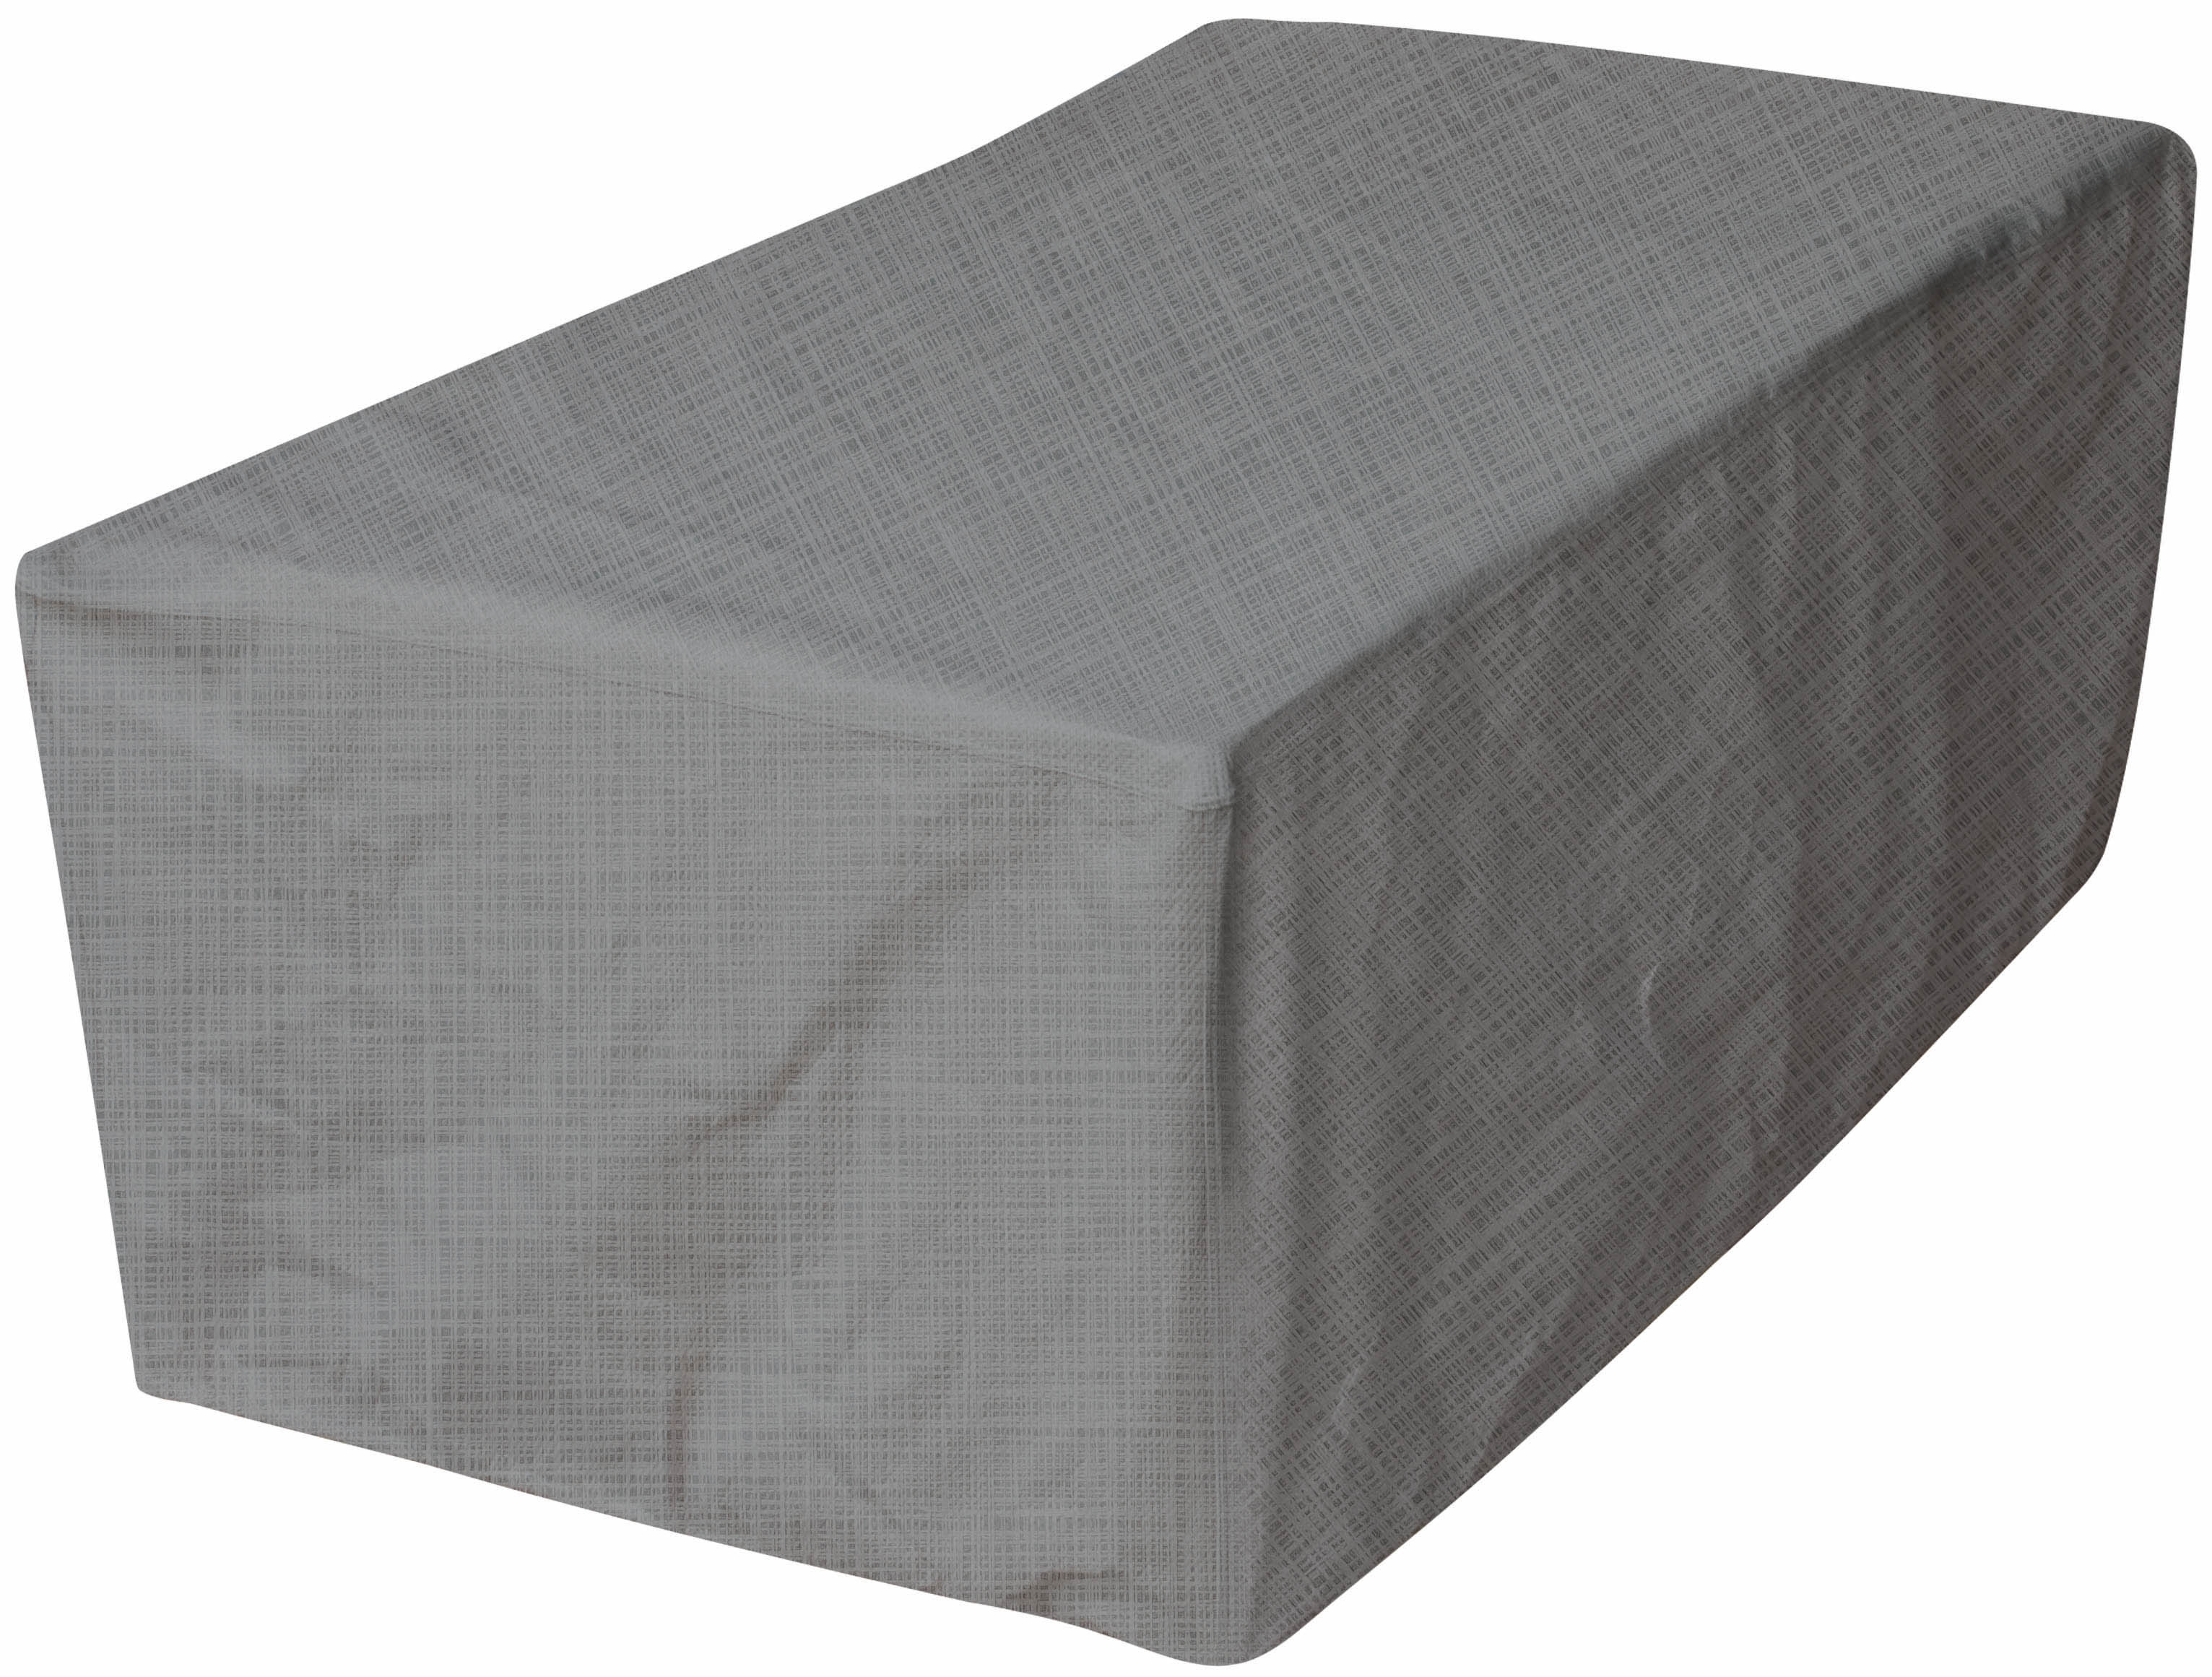 Protection cover for table 305 x 110 H: 75 cm